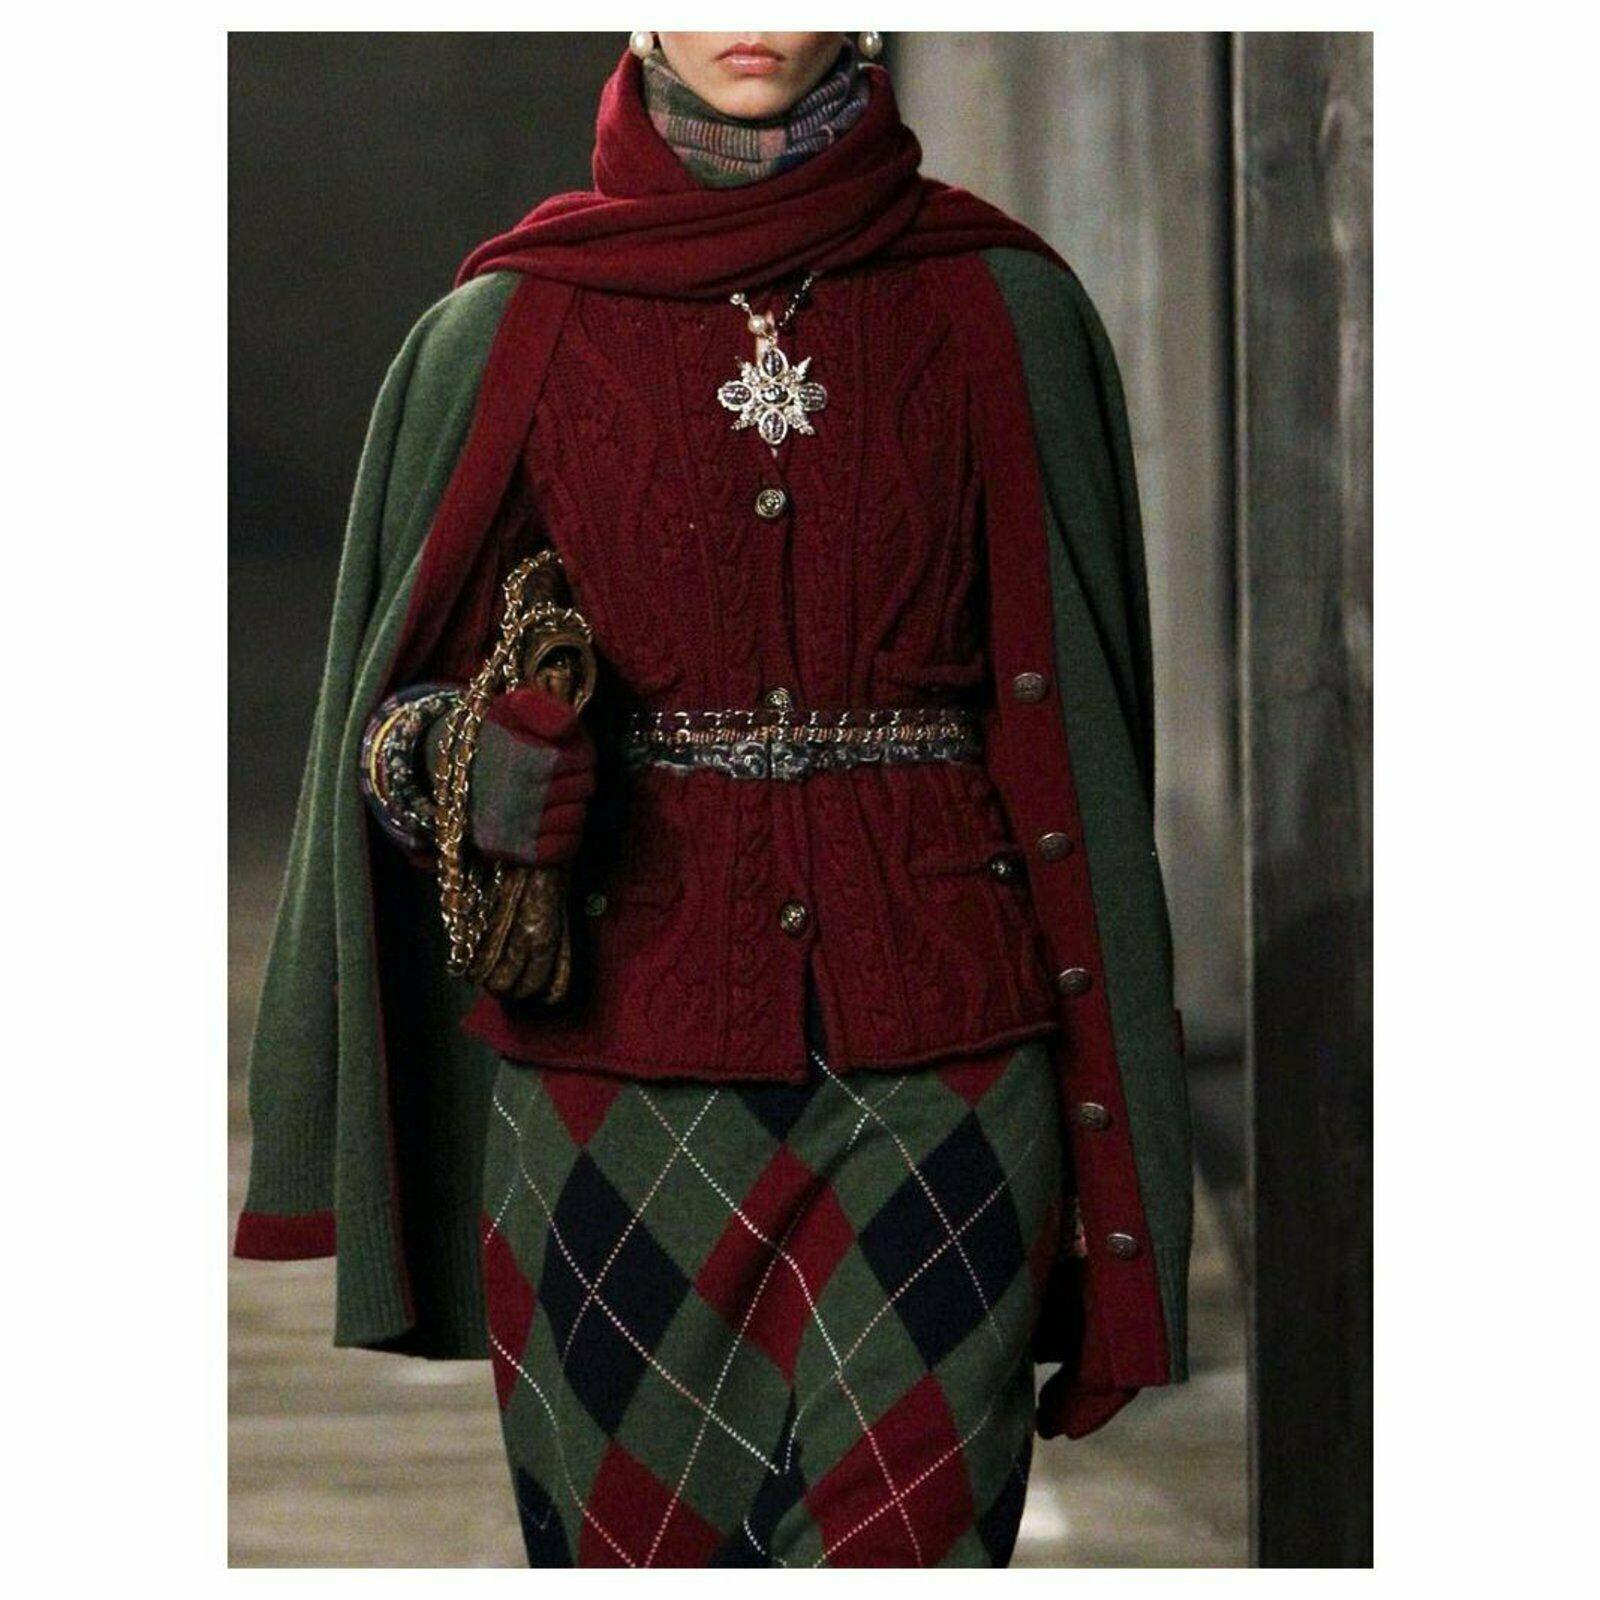 New Chanel tartan cashmere dress with CC Logo Patch from Paris / EDINBURGH Collection, 2013 Pre-Fall Metiers d'Art, 13a
Size mark 40 fr. NEVER WORN.